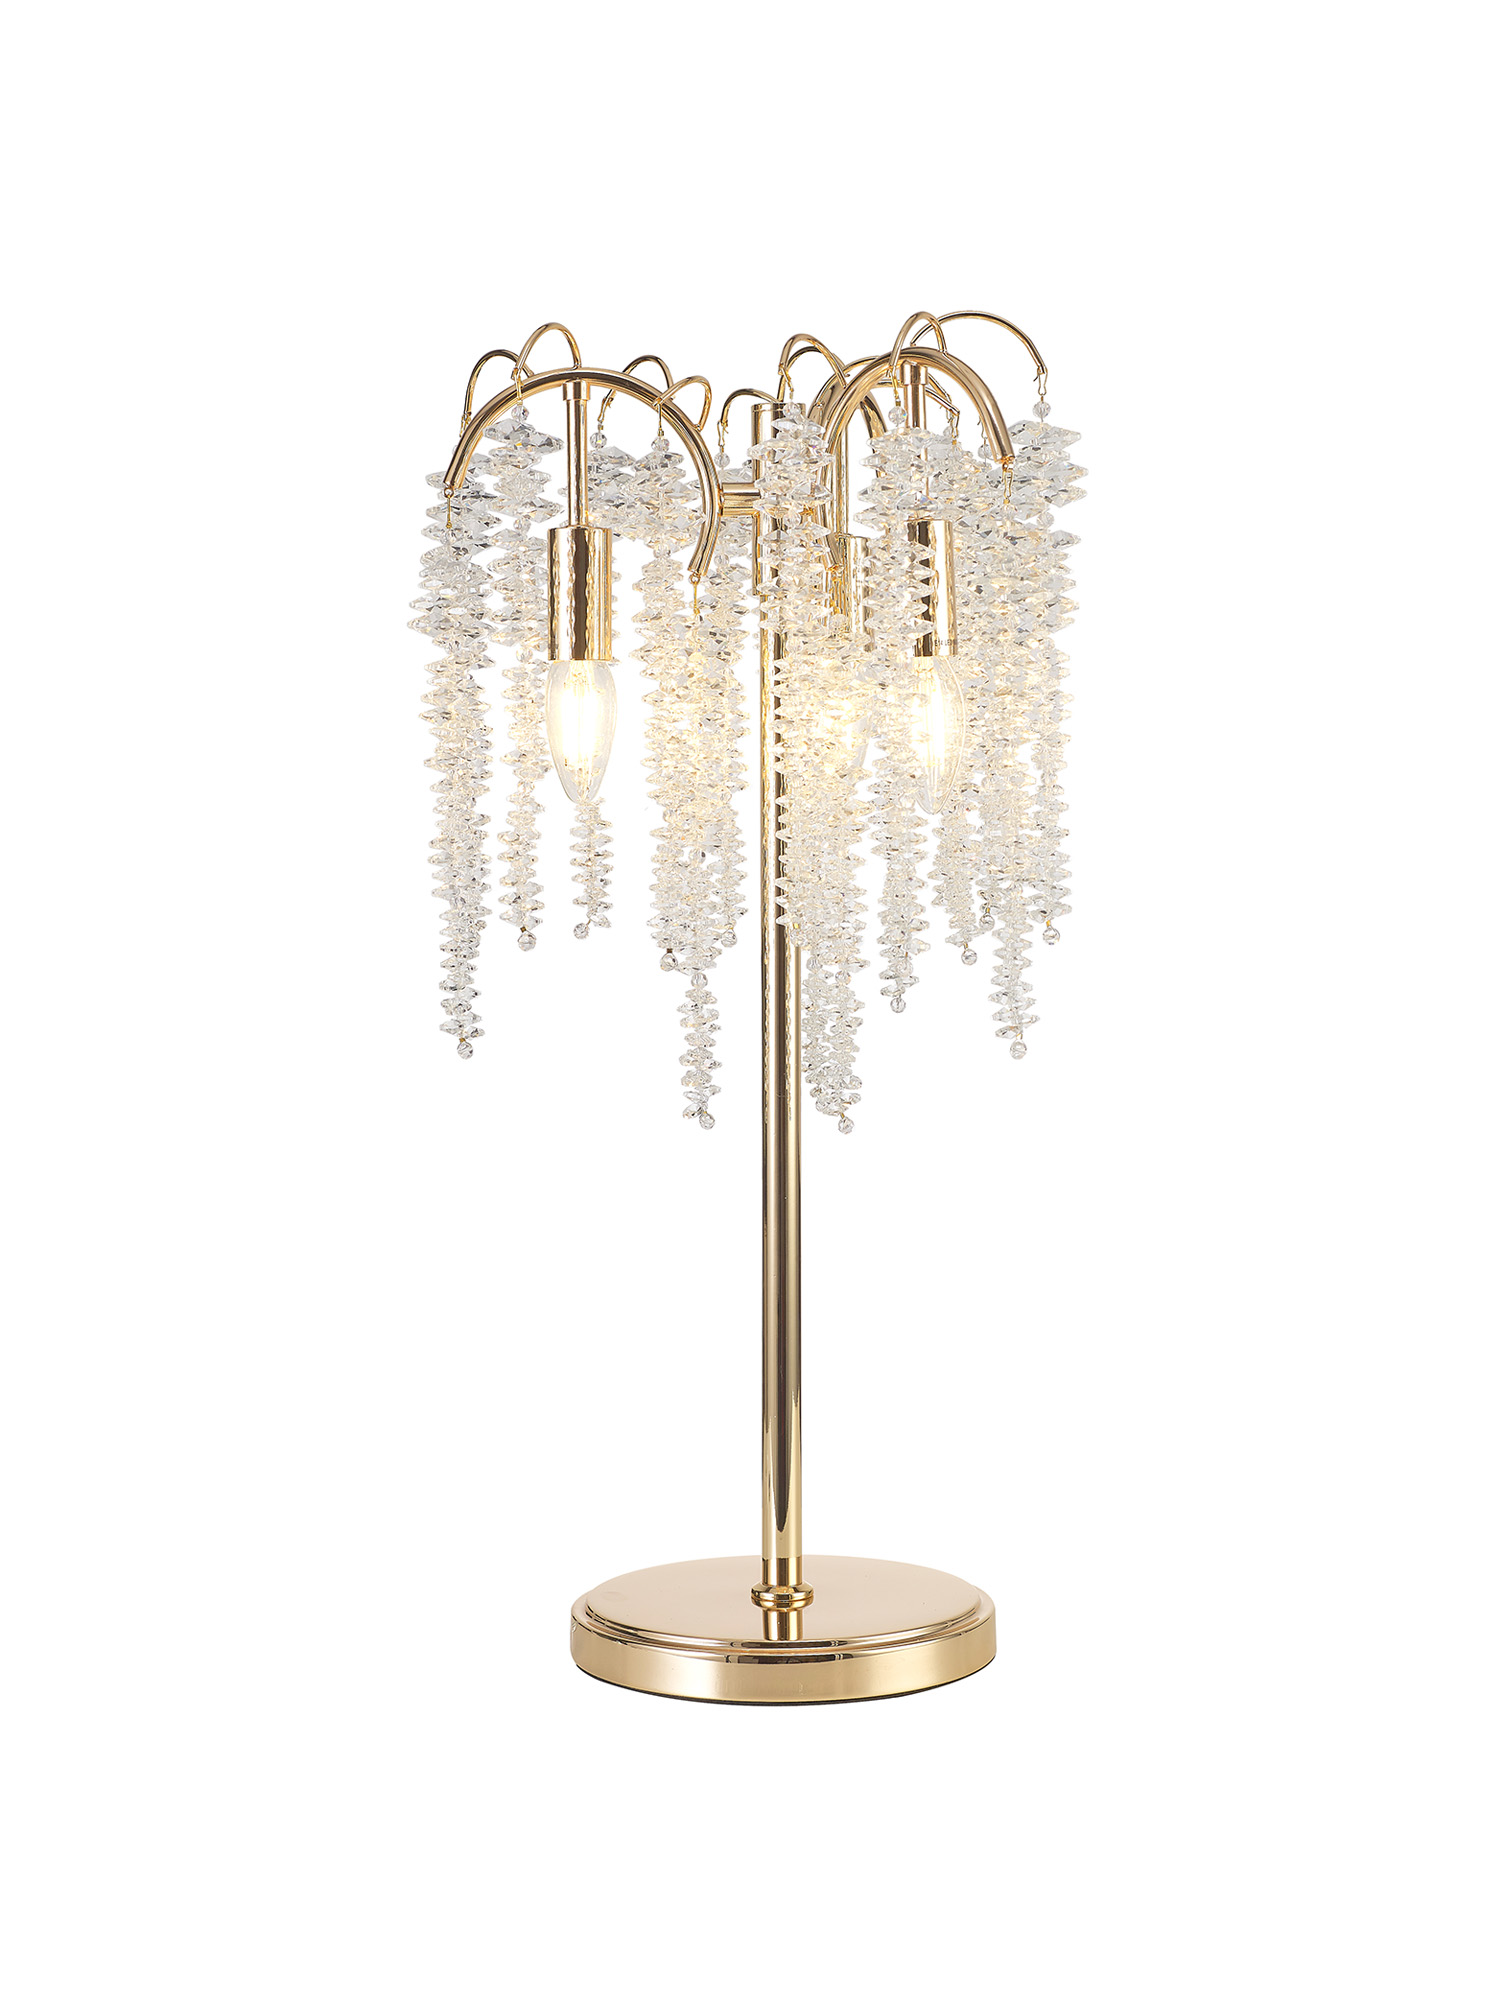 Wisteria French Gold Crystal Table Lamps Diyas Designer Table Lamps